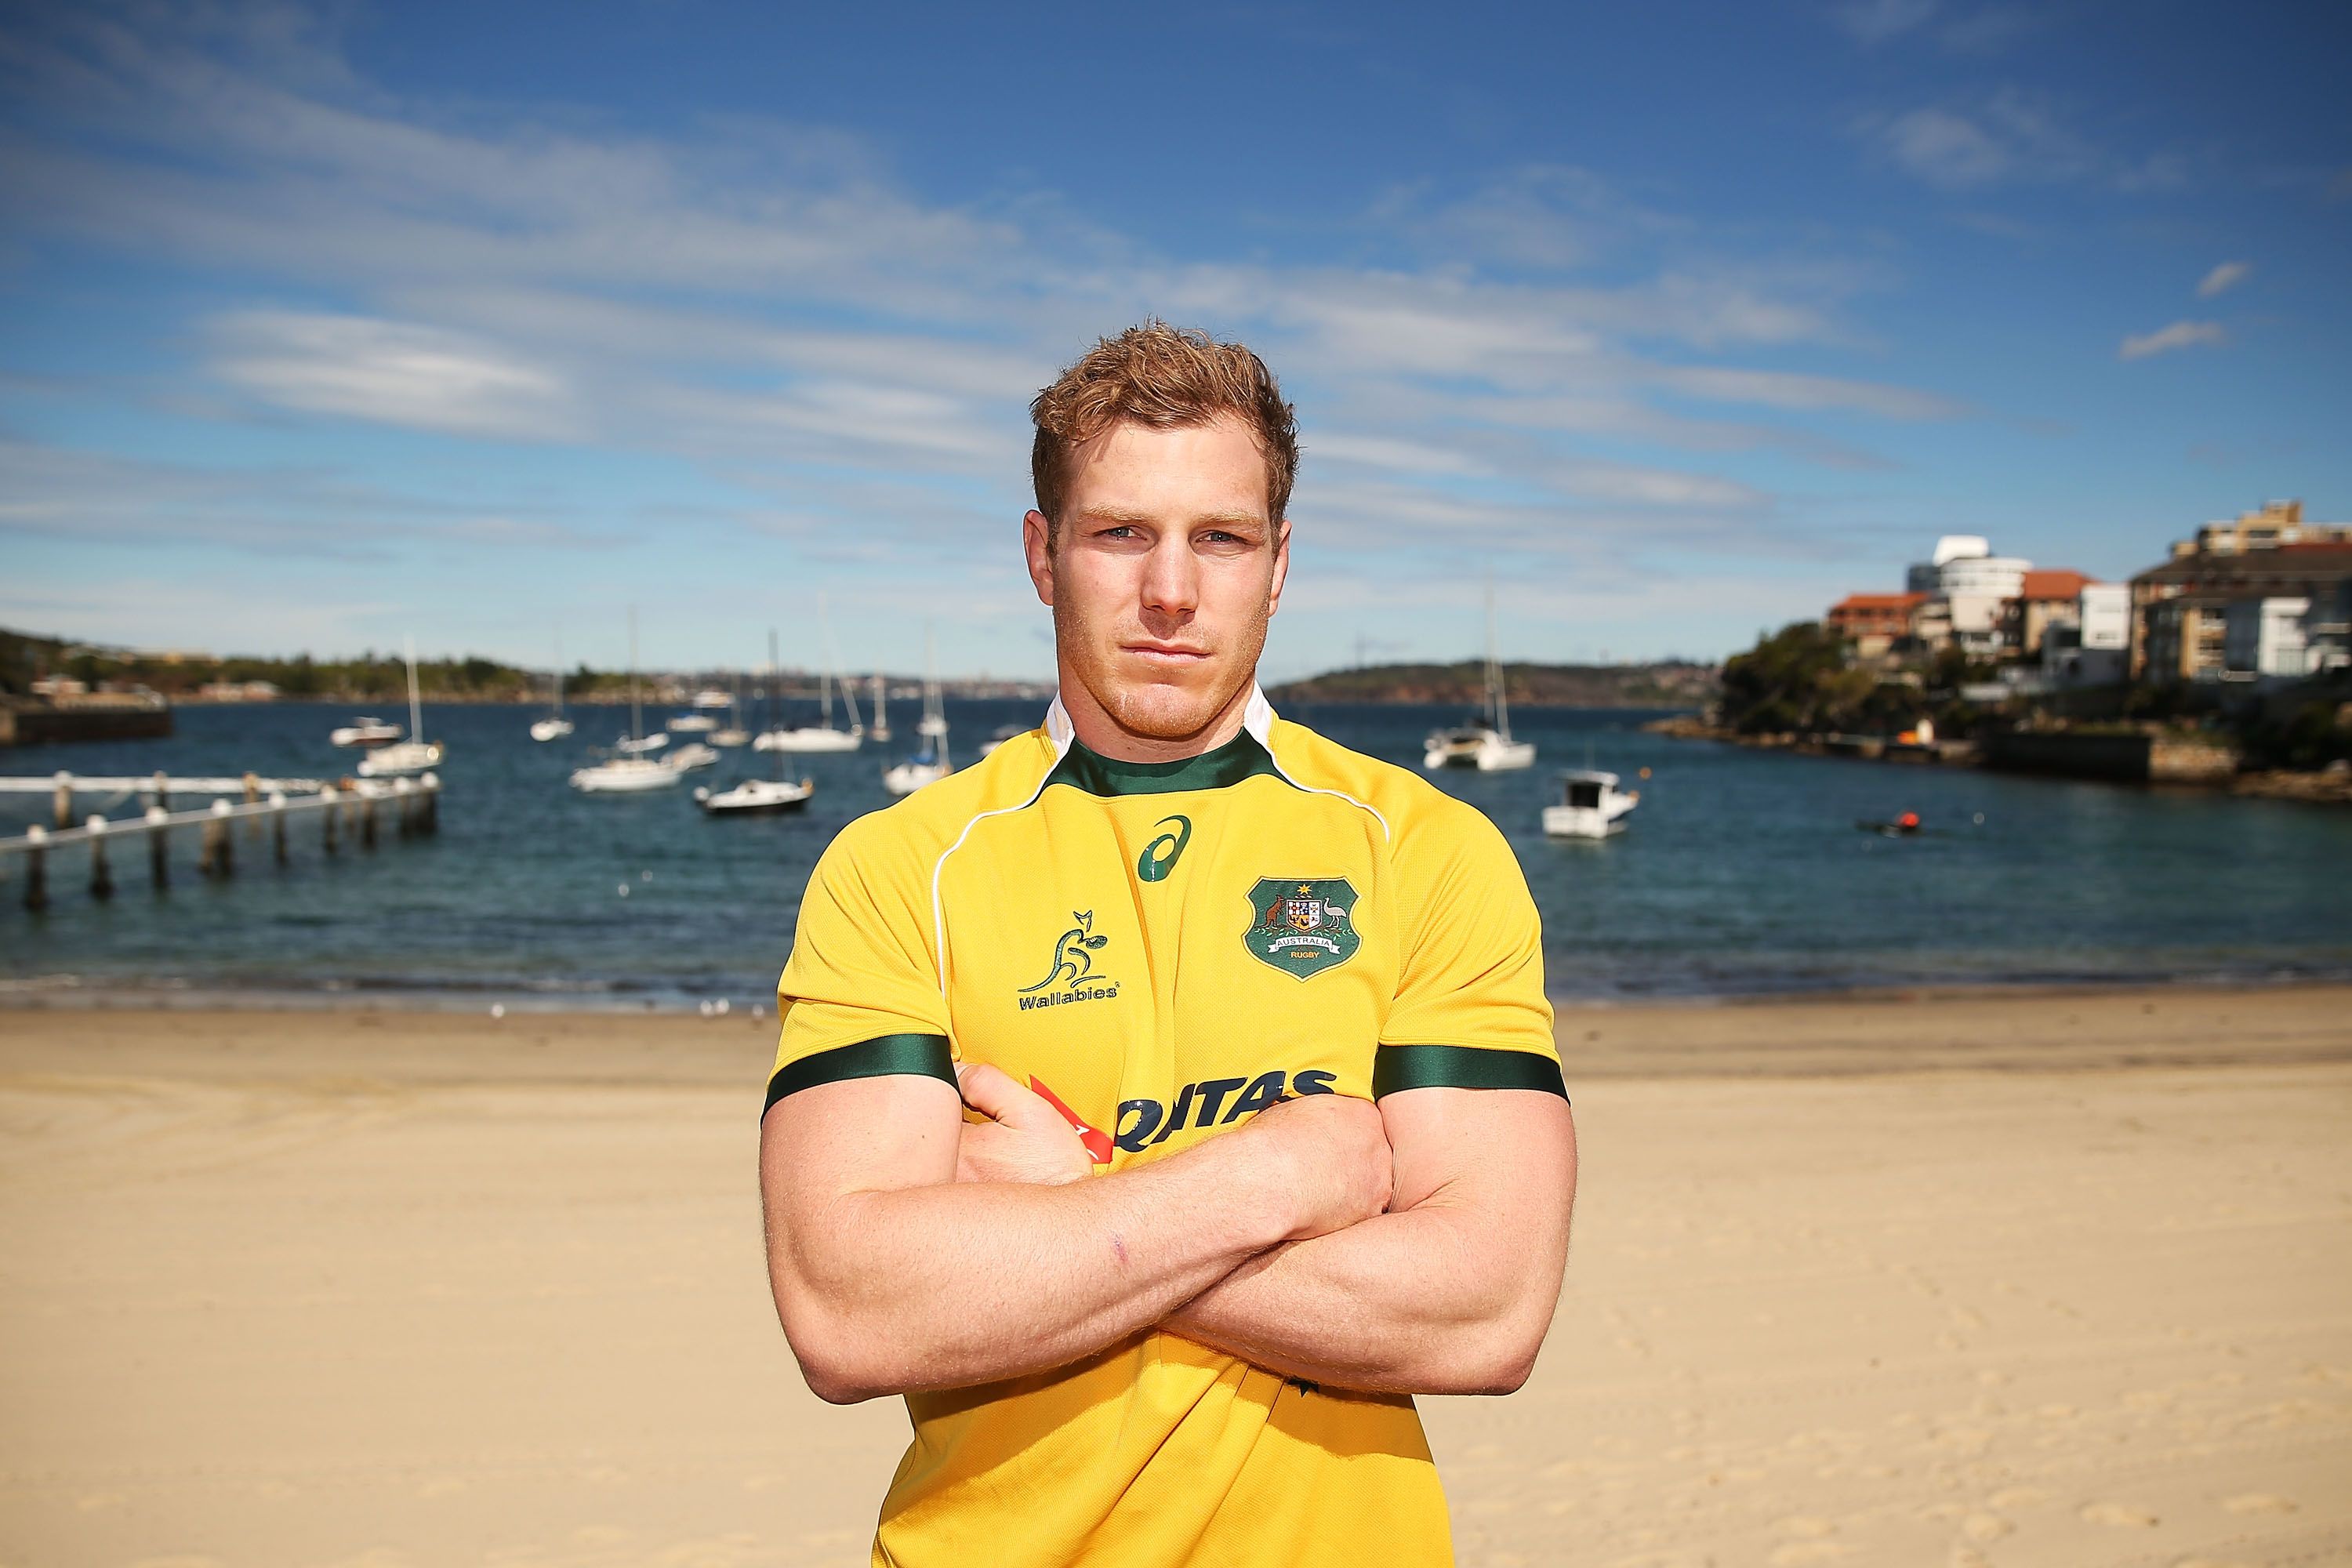 David Pocock of the Wallabies poses following an Australian Wallabies training session at Little Manly Beach on August 28, 2015 in Sydney, Australia | Photo: Getty Images